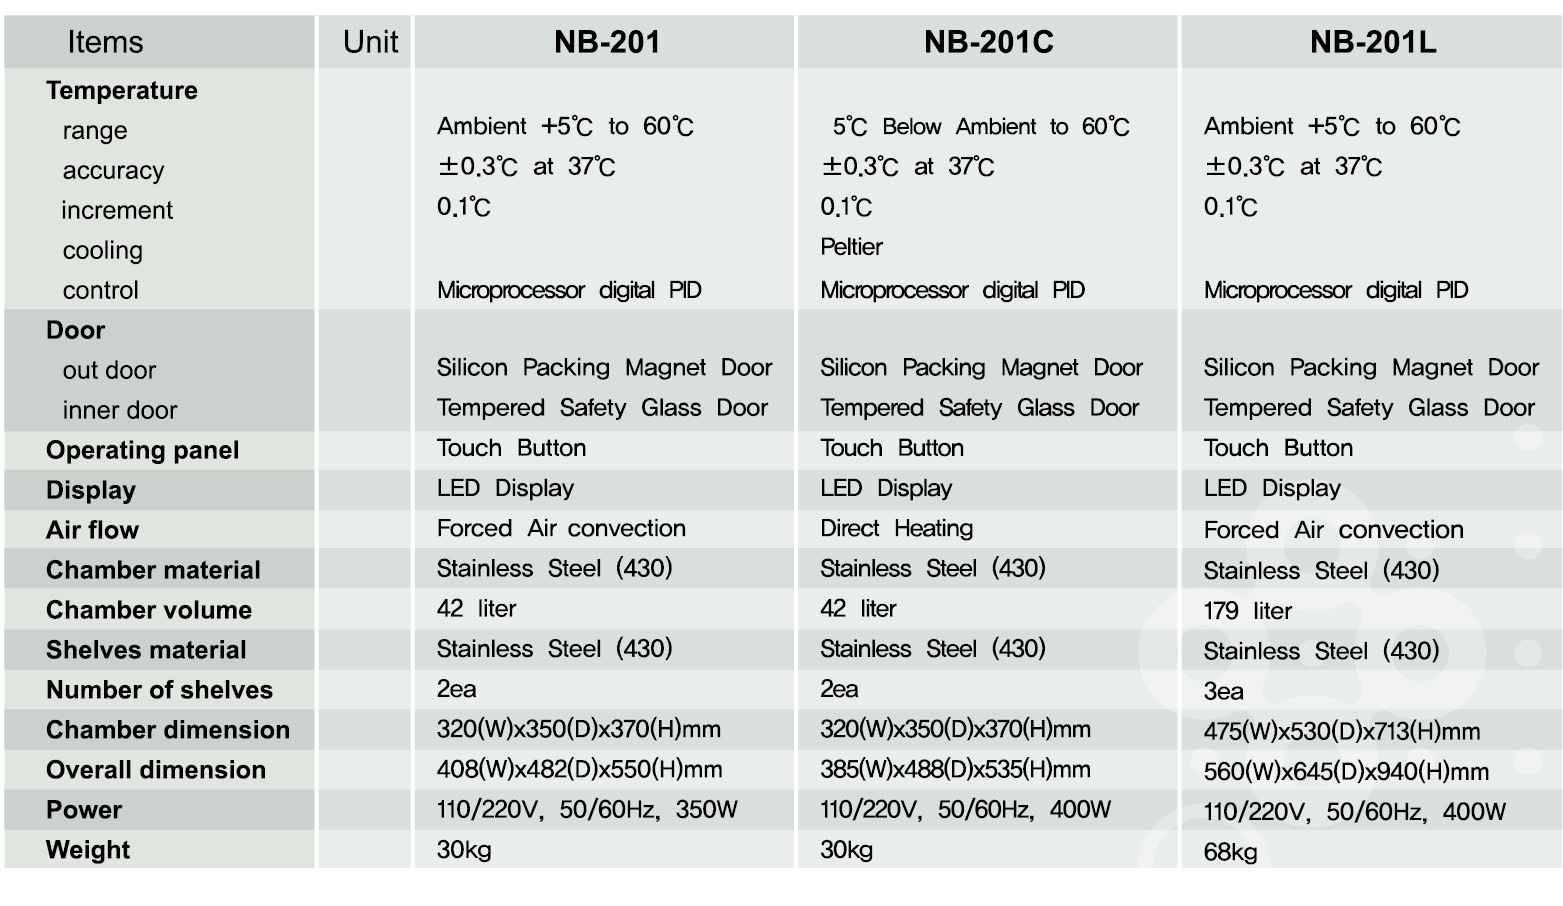 NB-201 Specifications